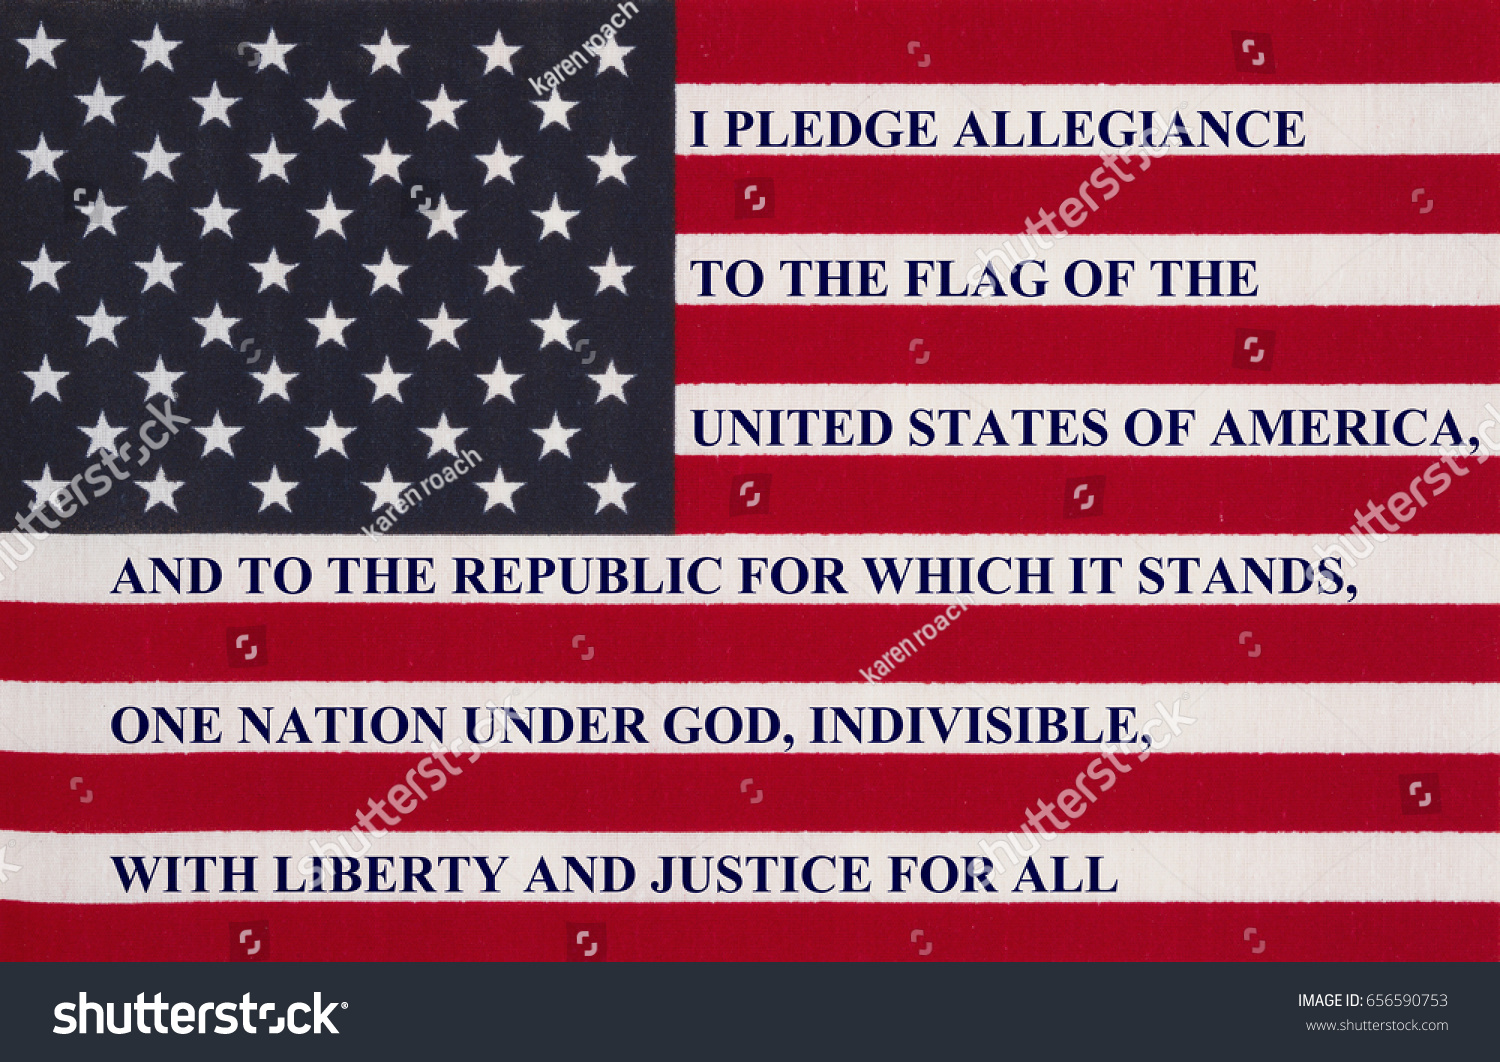 The pledge of allegiance written on the United States of America flag #656590753